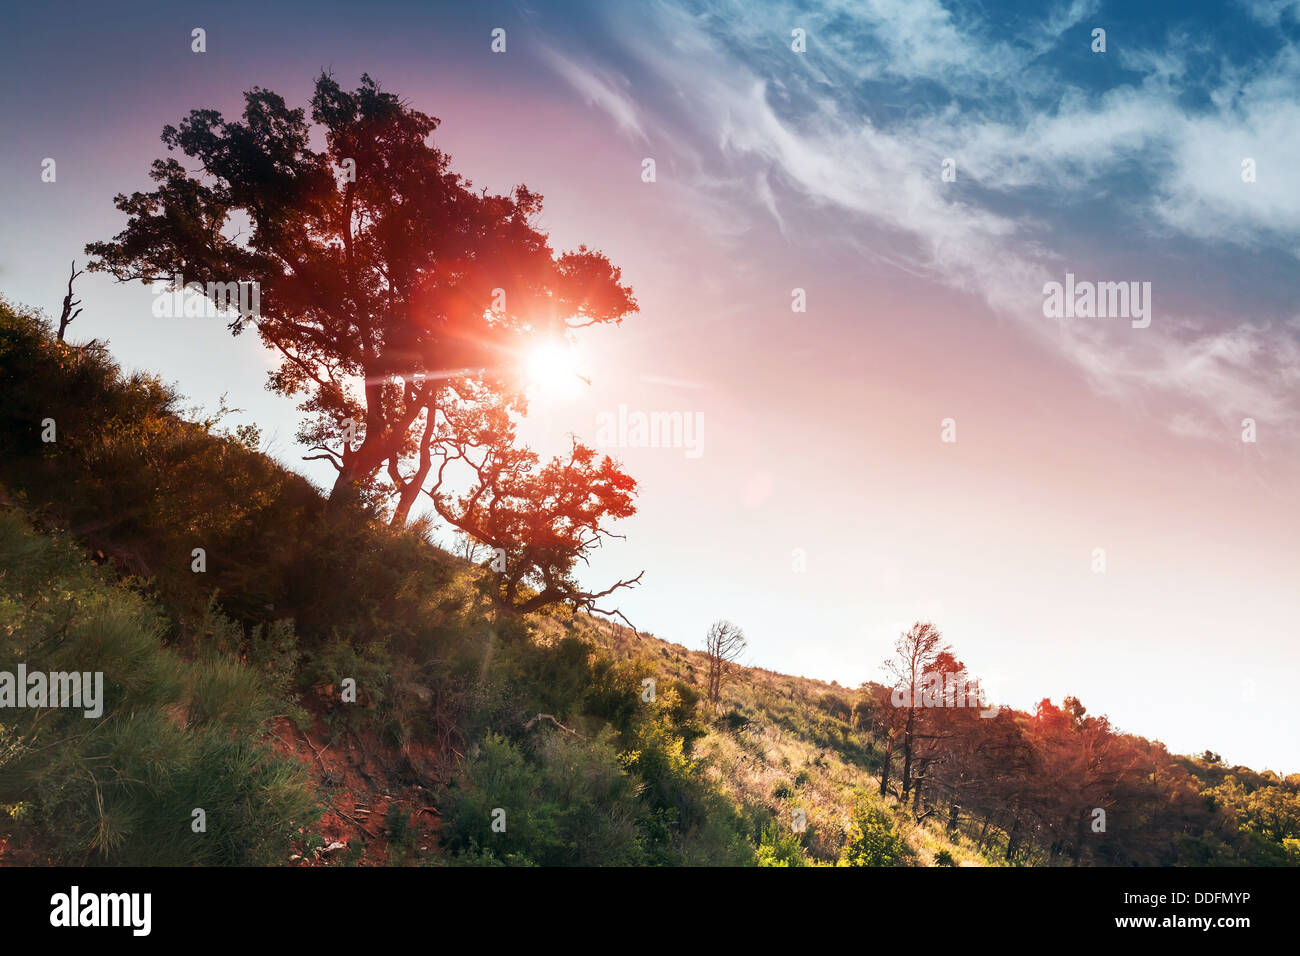 Colorful morning landscape with trees silhouettes and bright rising sun Stock Photo